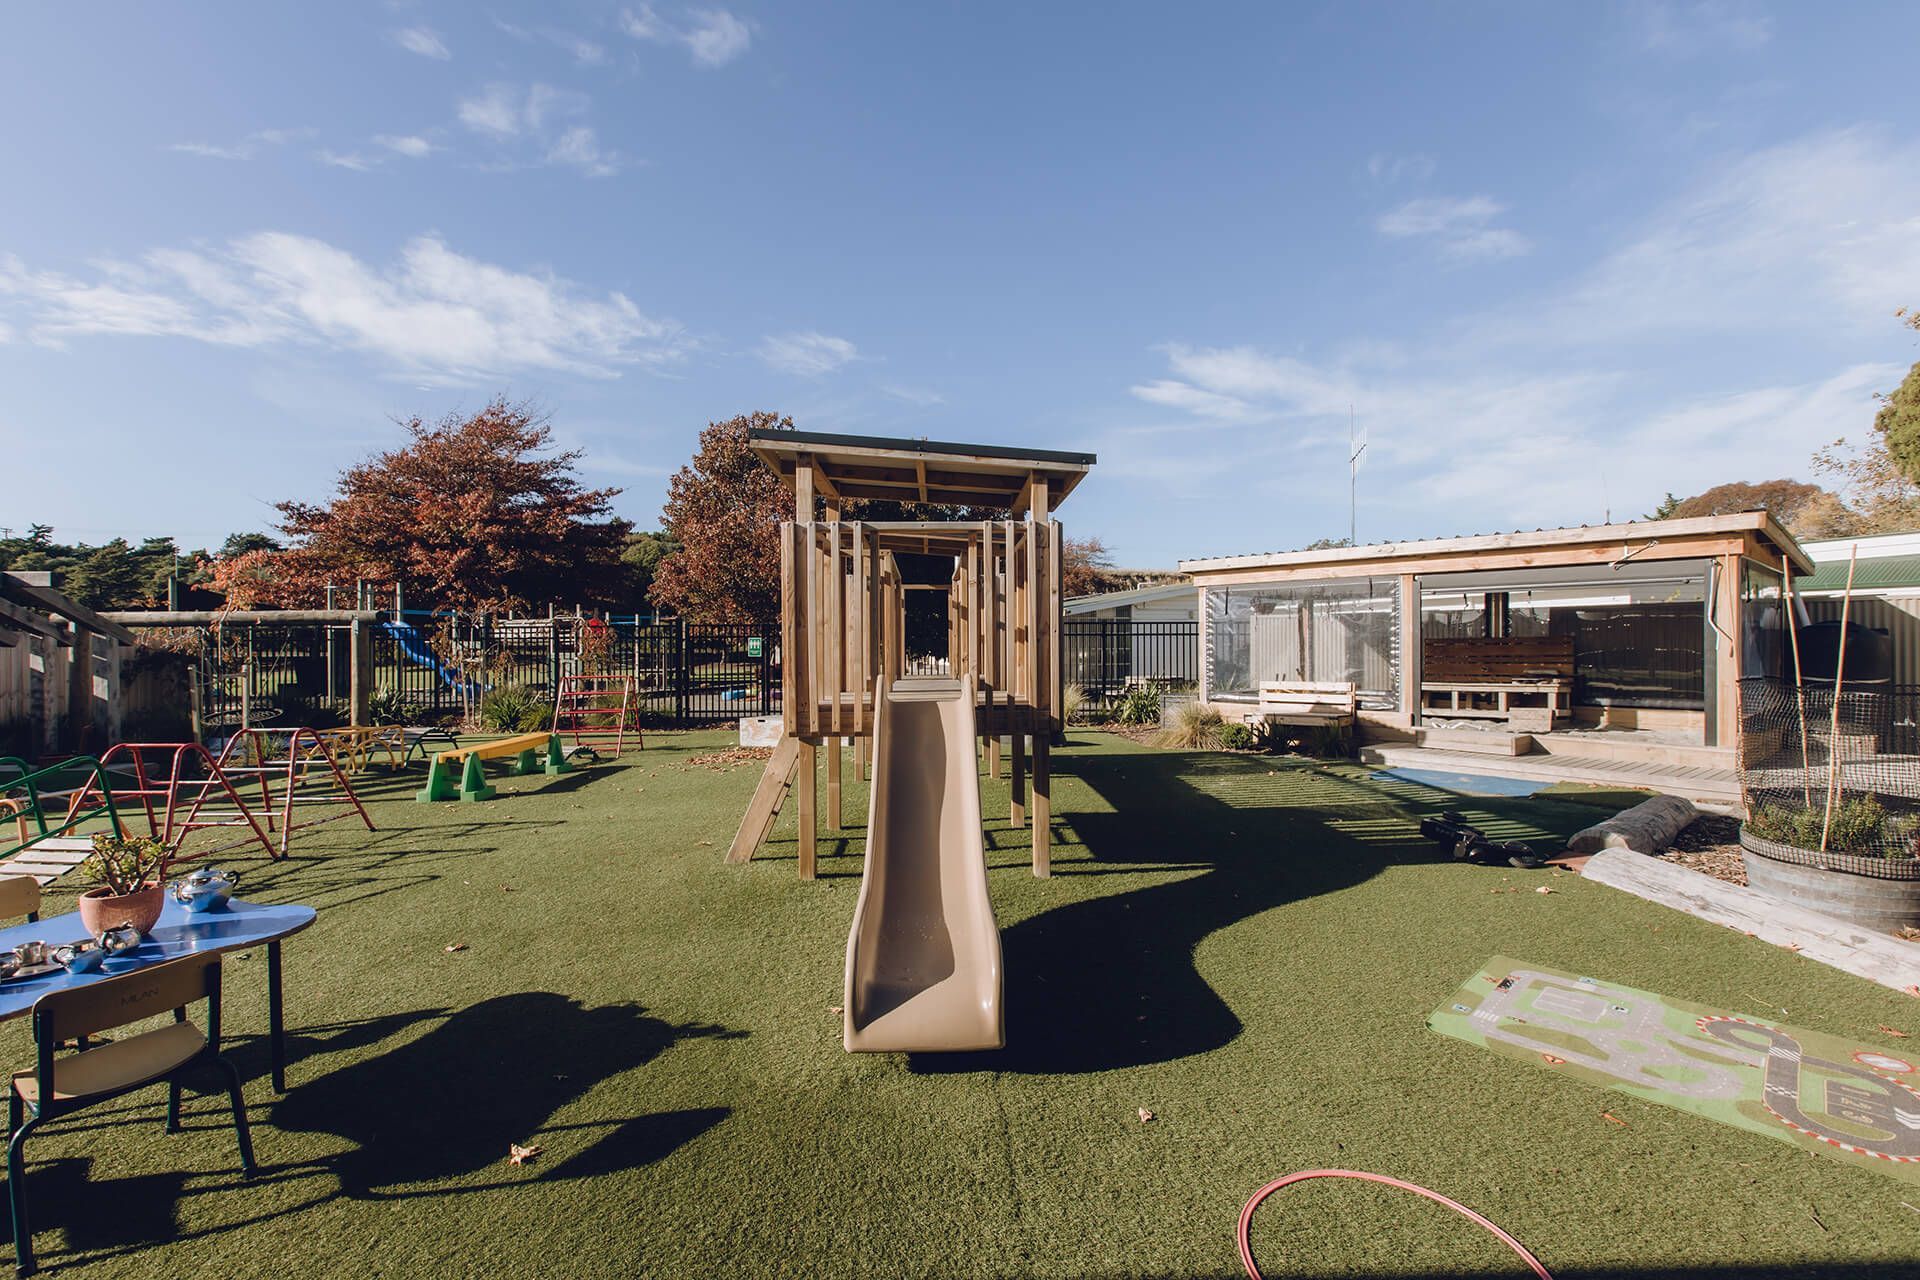 Awatere Early Learning Centre in Seddon, Marlborough, New Zealand